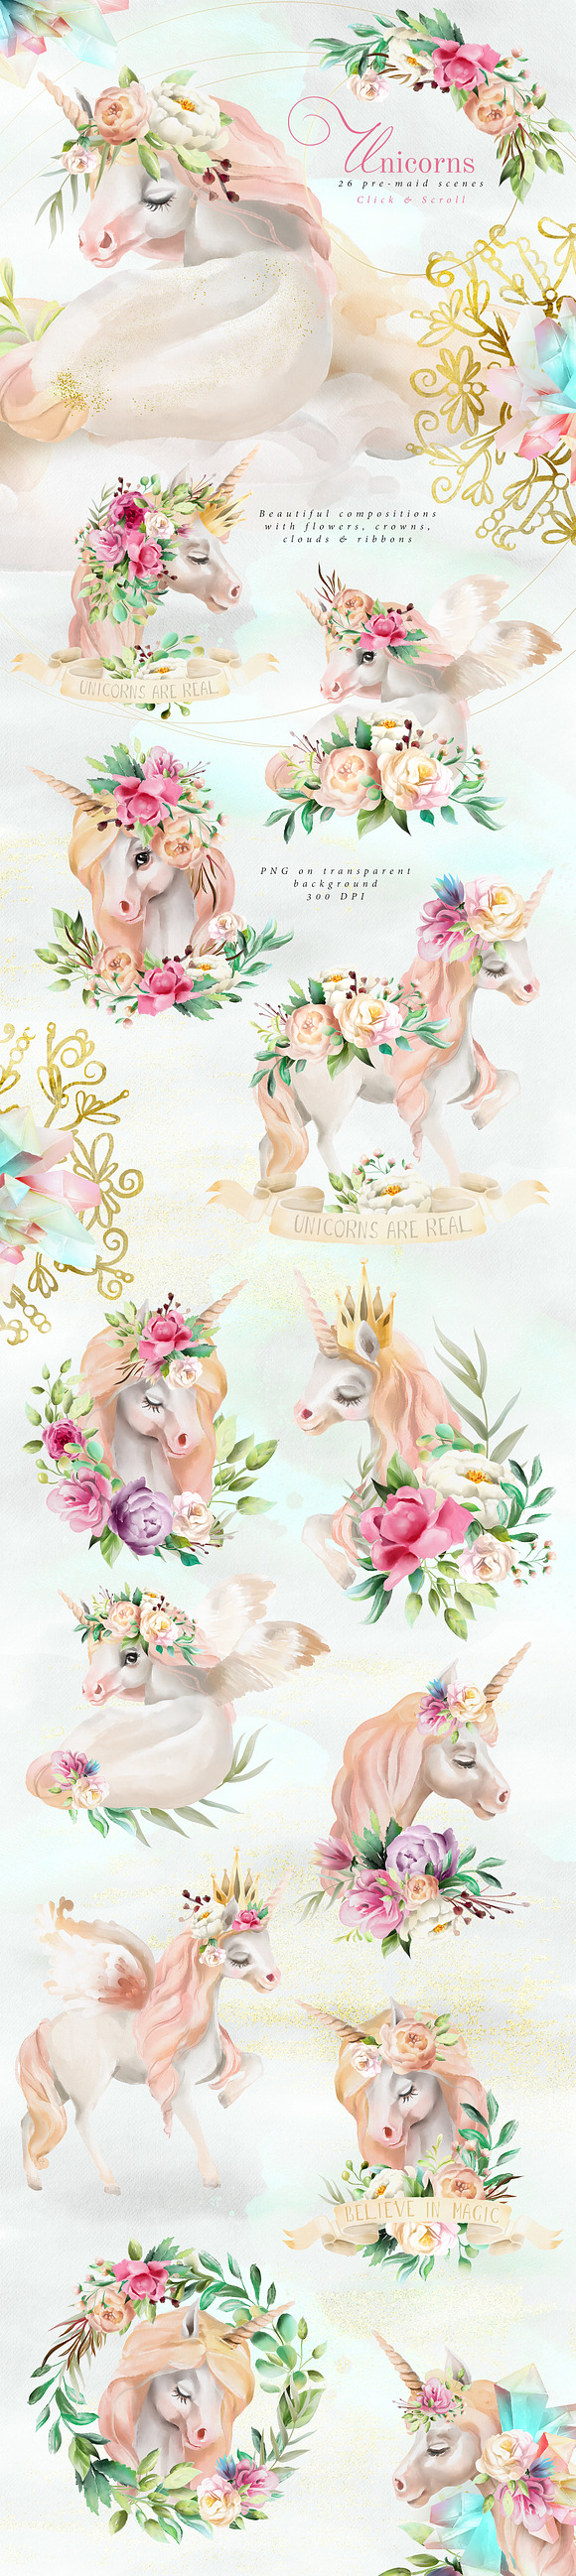 Believe In Unicorns in Illustrations - product preview 1